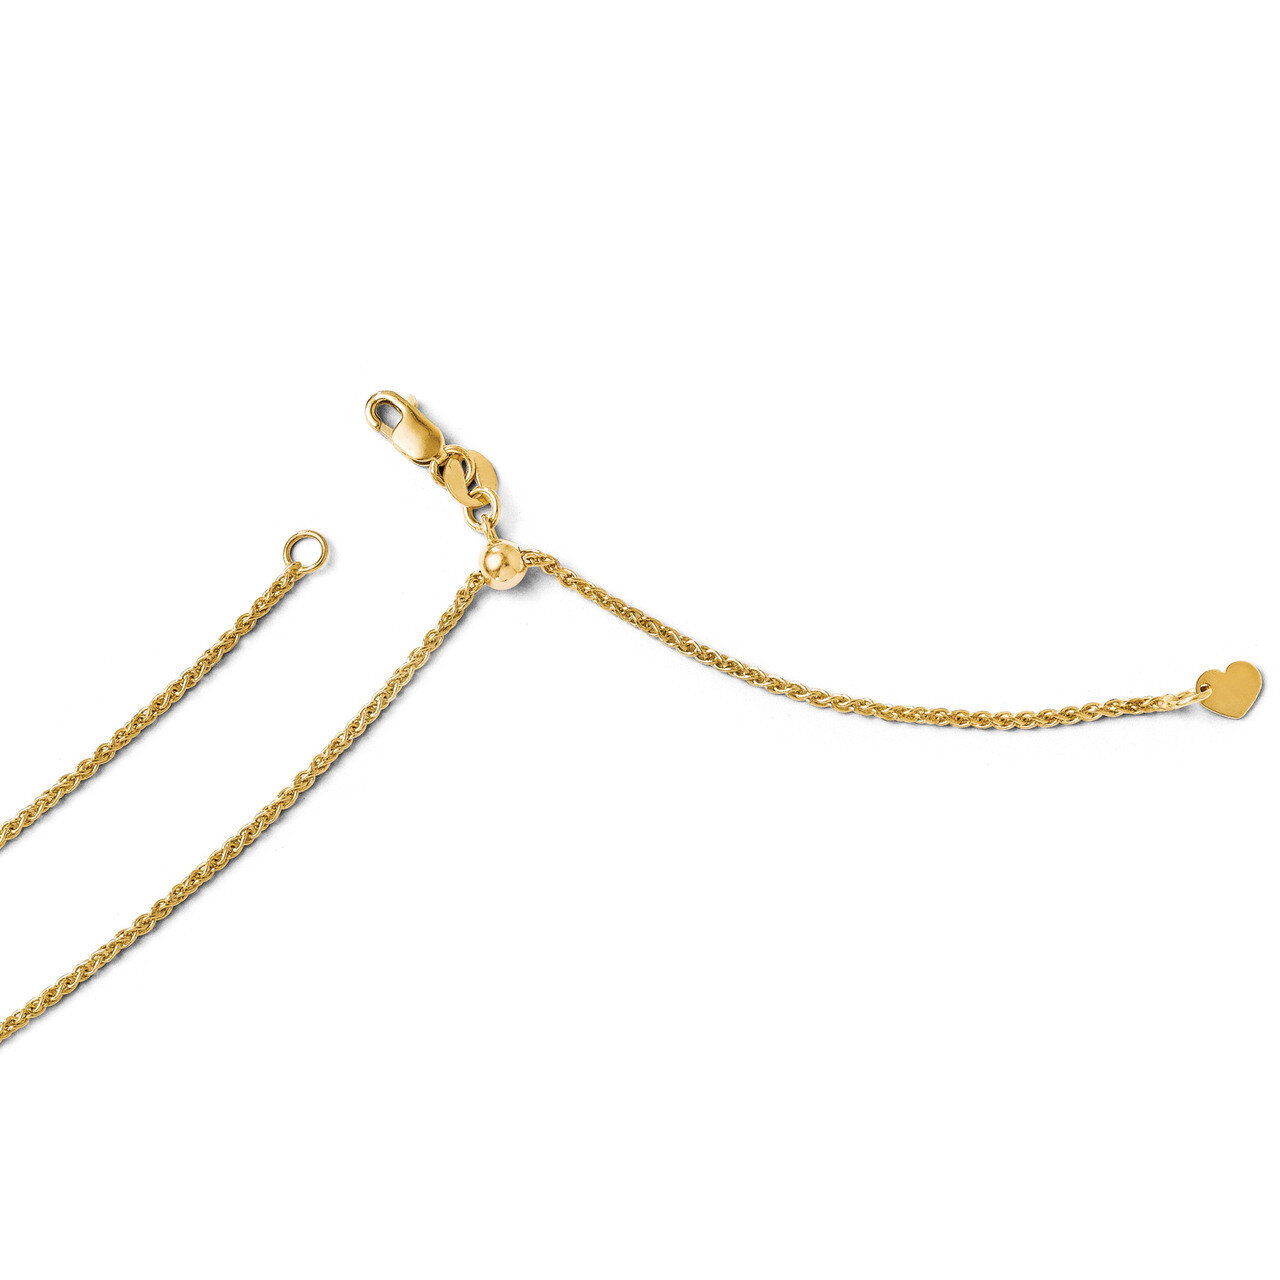 Adjustable Wheat Chain 22 Inch - 14k Gold HB-3186-22